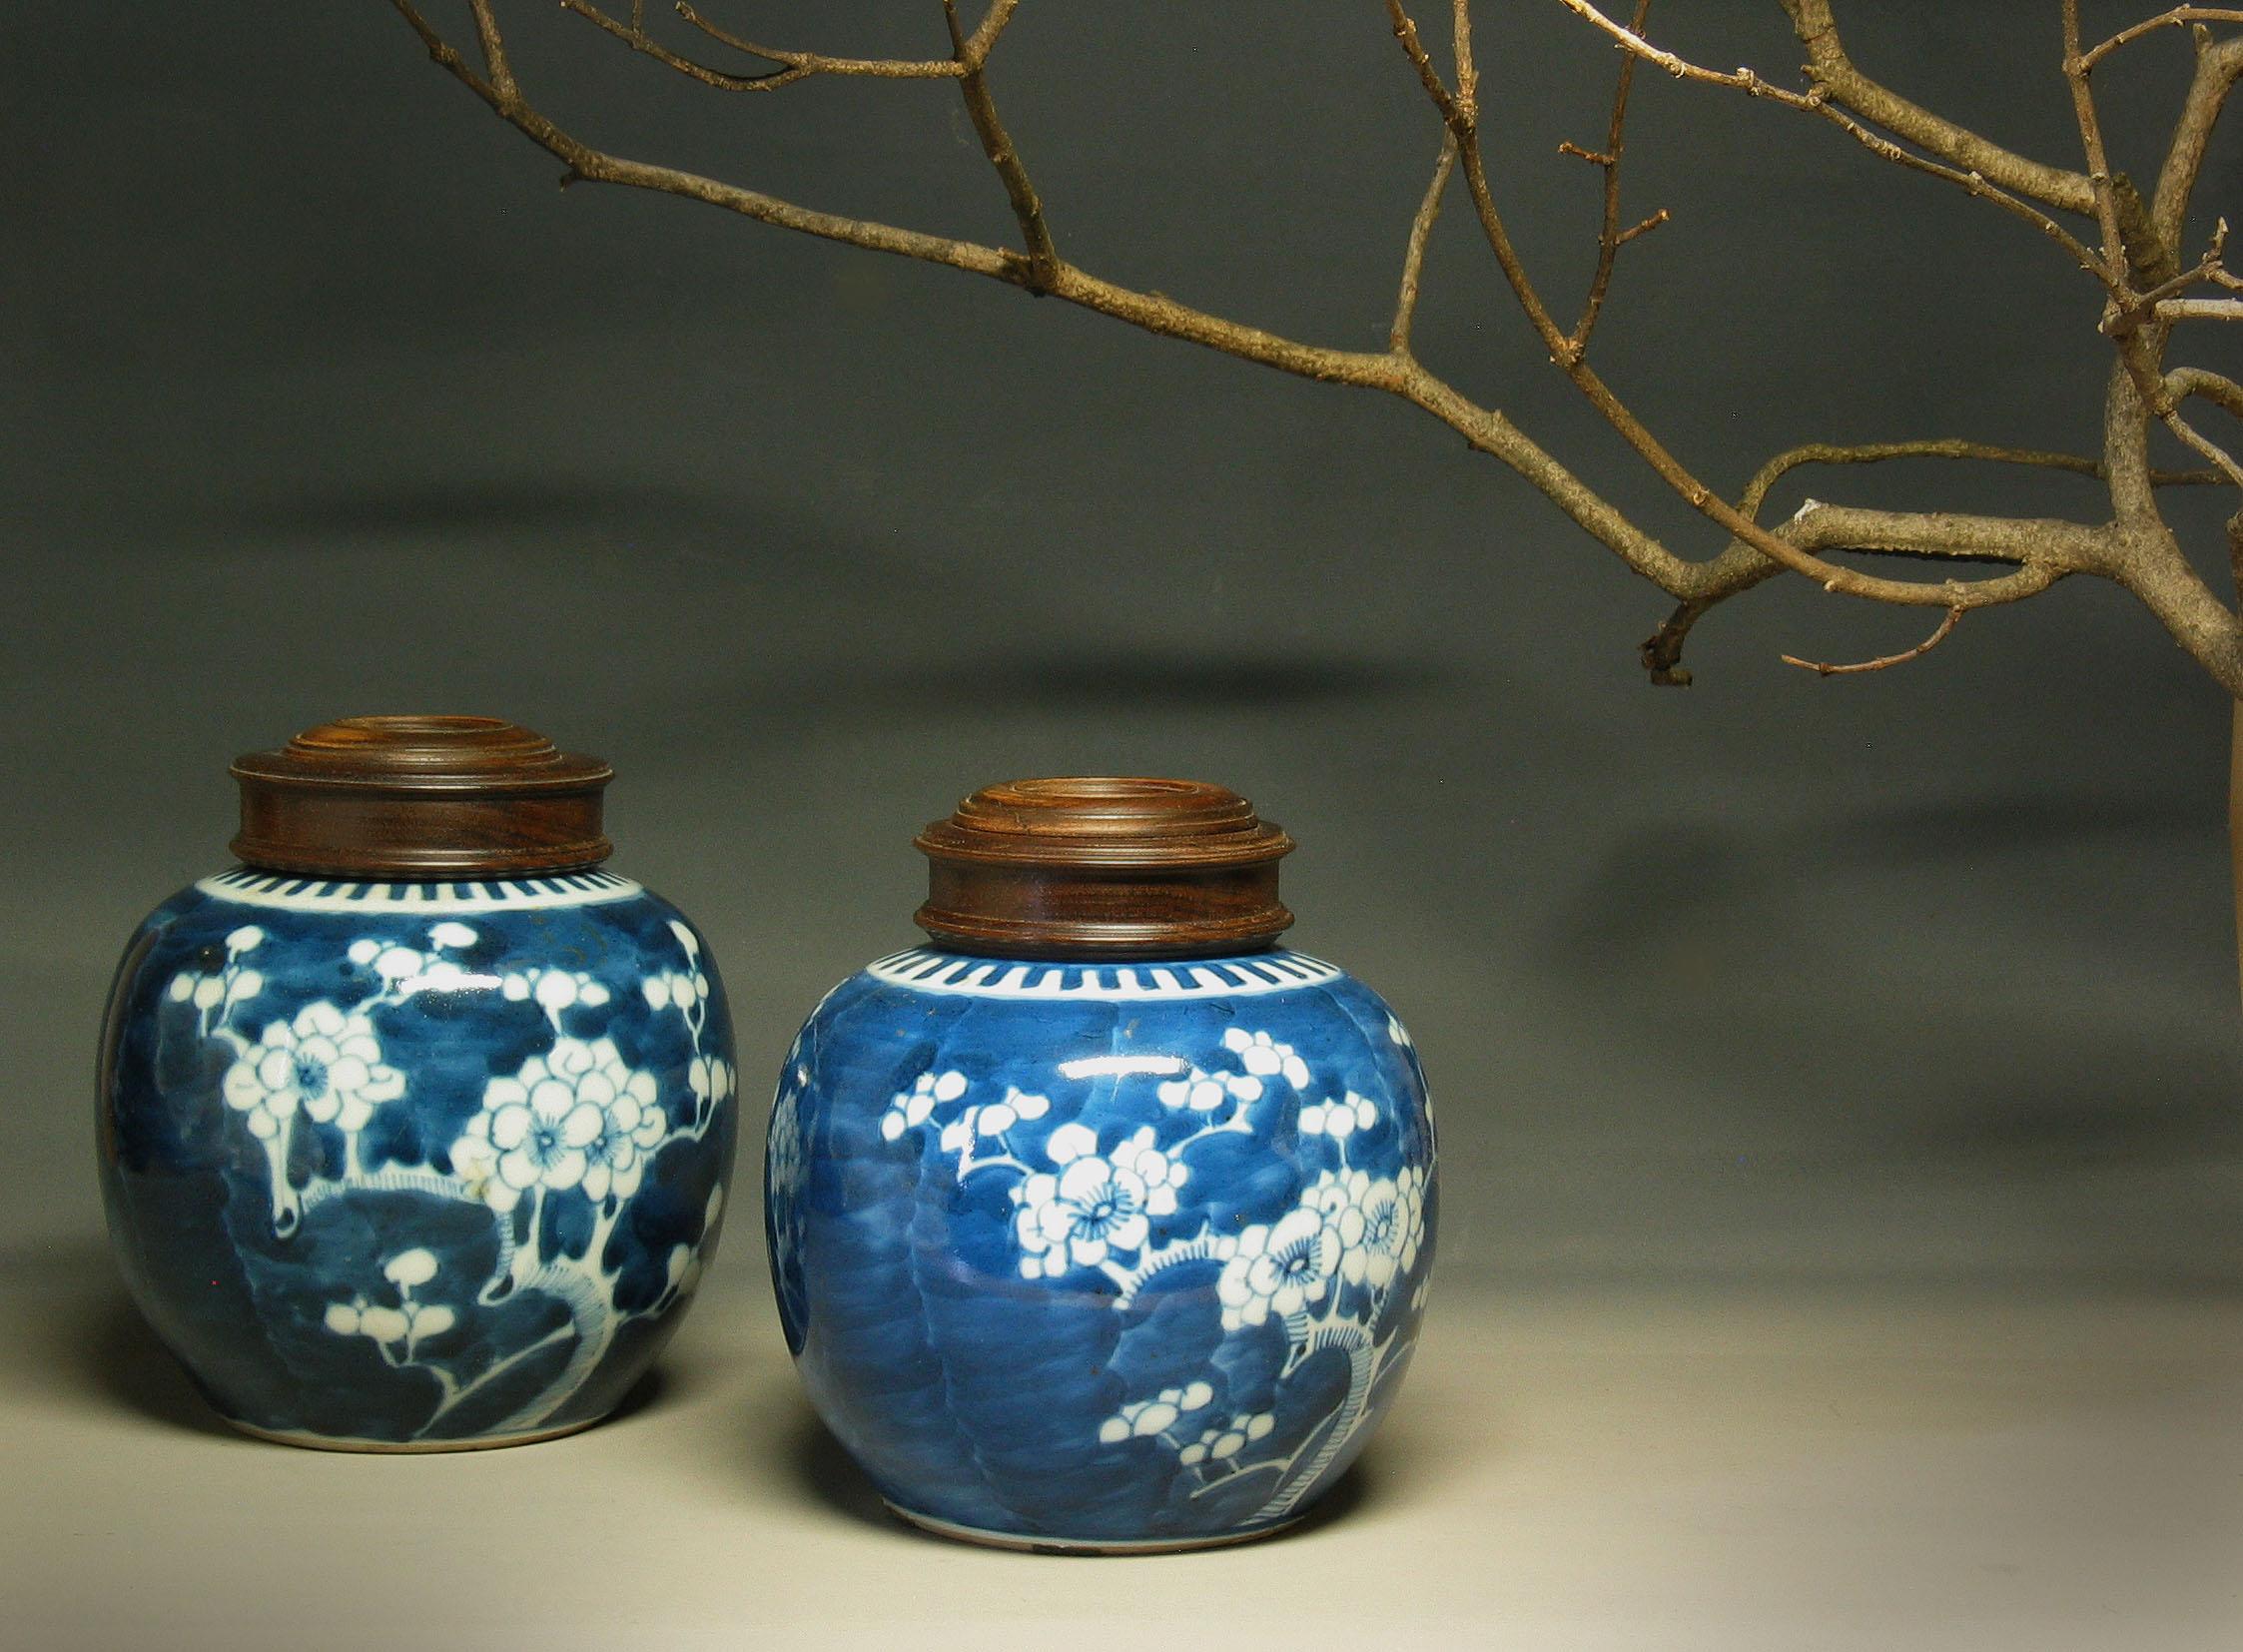 Porcelain Two Chinese Blue and White Prunus Globular Jars Late Qing Dynasty